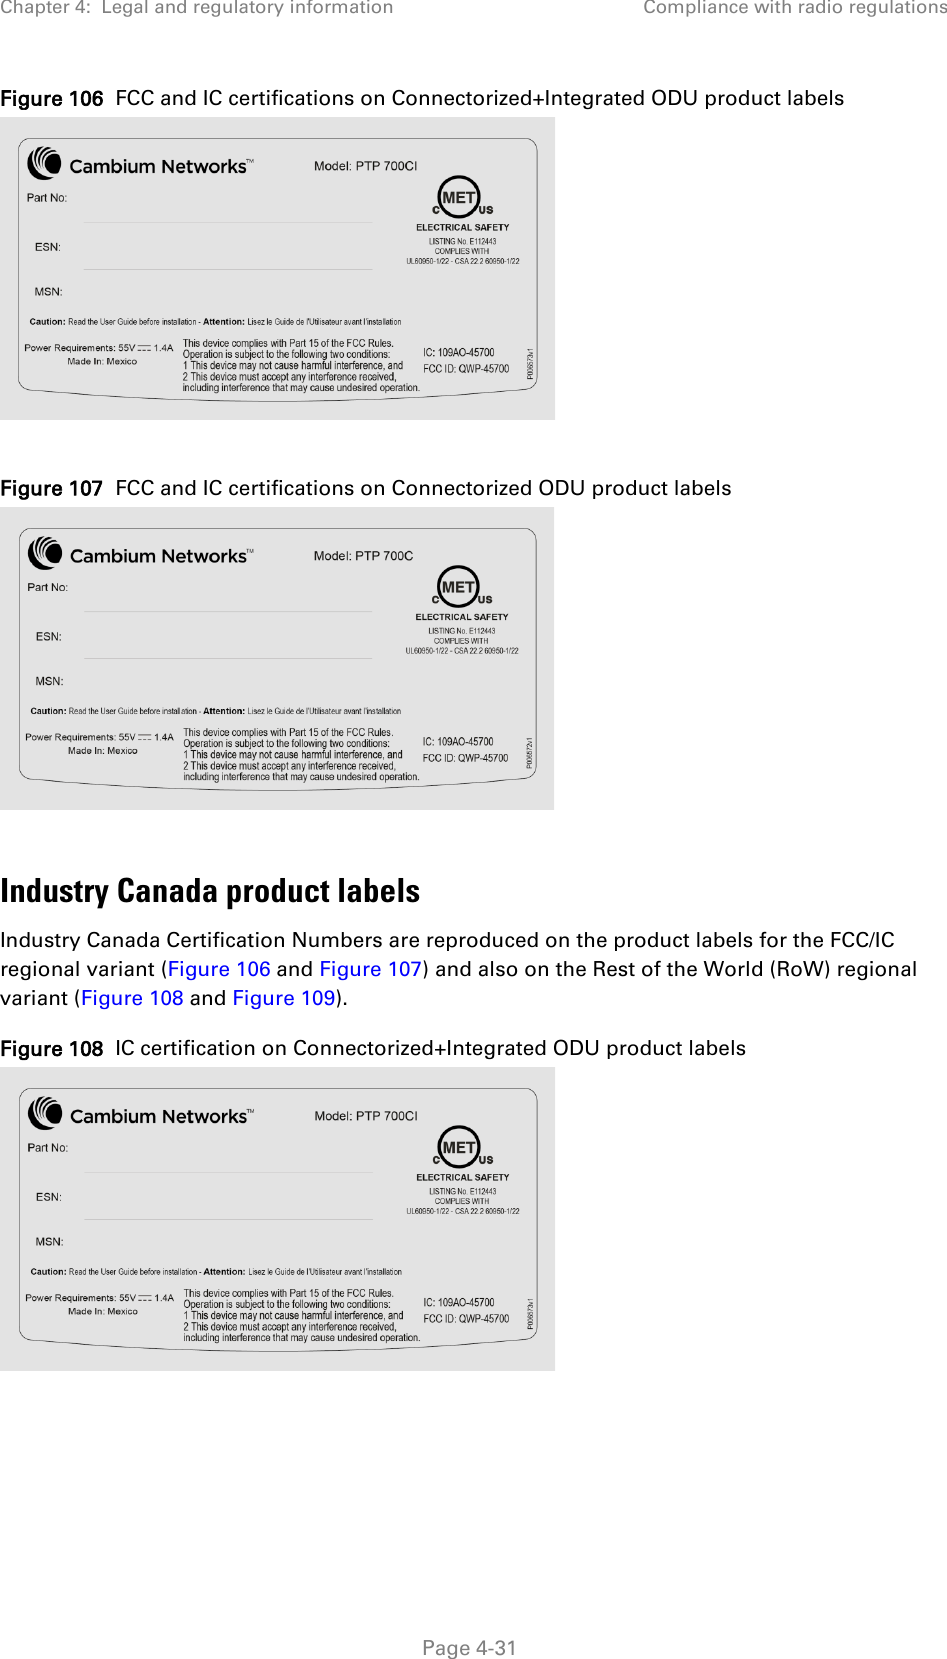 Chapter 4:  Legal and regulatory information Compliance with radio regulations  Figure 106  FCC and IC certifications on Connectorized+Integrated ODU product labels   Figure 107  FCC and IC certifications on Connectorized ODU product labels   Industry Canada product labels Industry Canada Certification Numbers are reproduced on the product labels for the FCC/IC regional variant (Figure 106 and Figure 107) and also on the Rest of the World (RoW) regional variant (Figure 108 and Figure 109). Figure 108  IC certification on Connectorized+Integrated ODU product labels    Page 4-31 